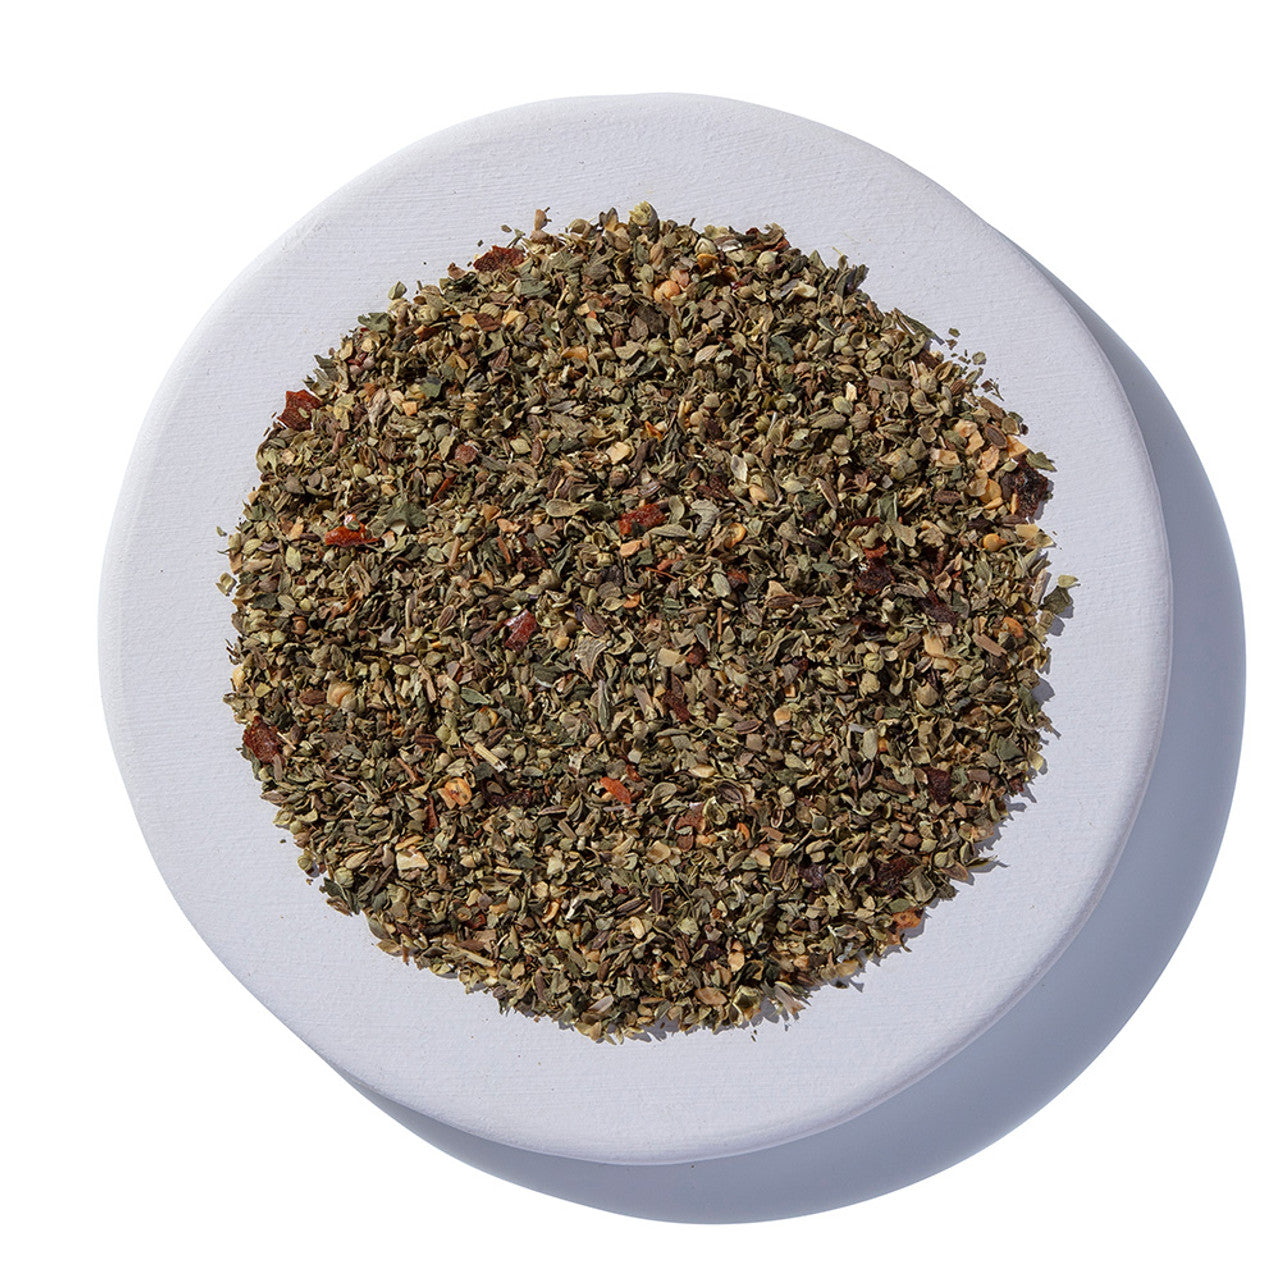 Our organic Greek Seasoning is made using a variety of herbs and spices, bringing a delicious and authentic Greek flavour to a variety of different meats, vegetables and recipes!